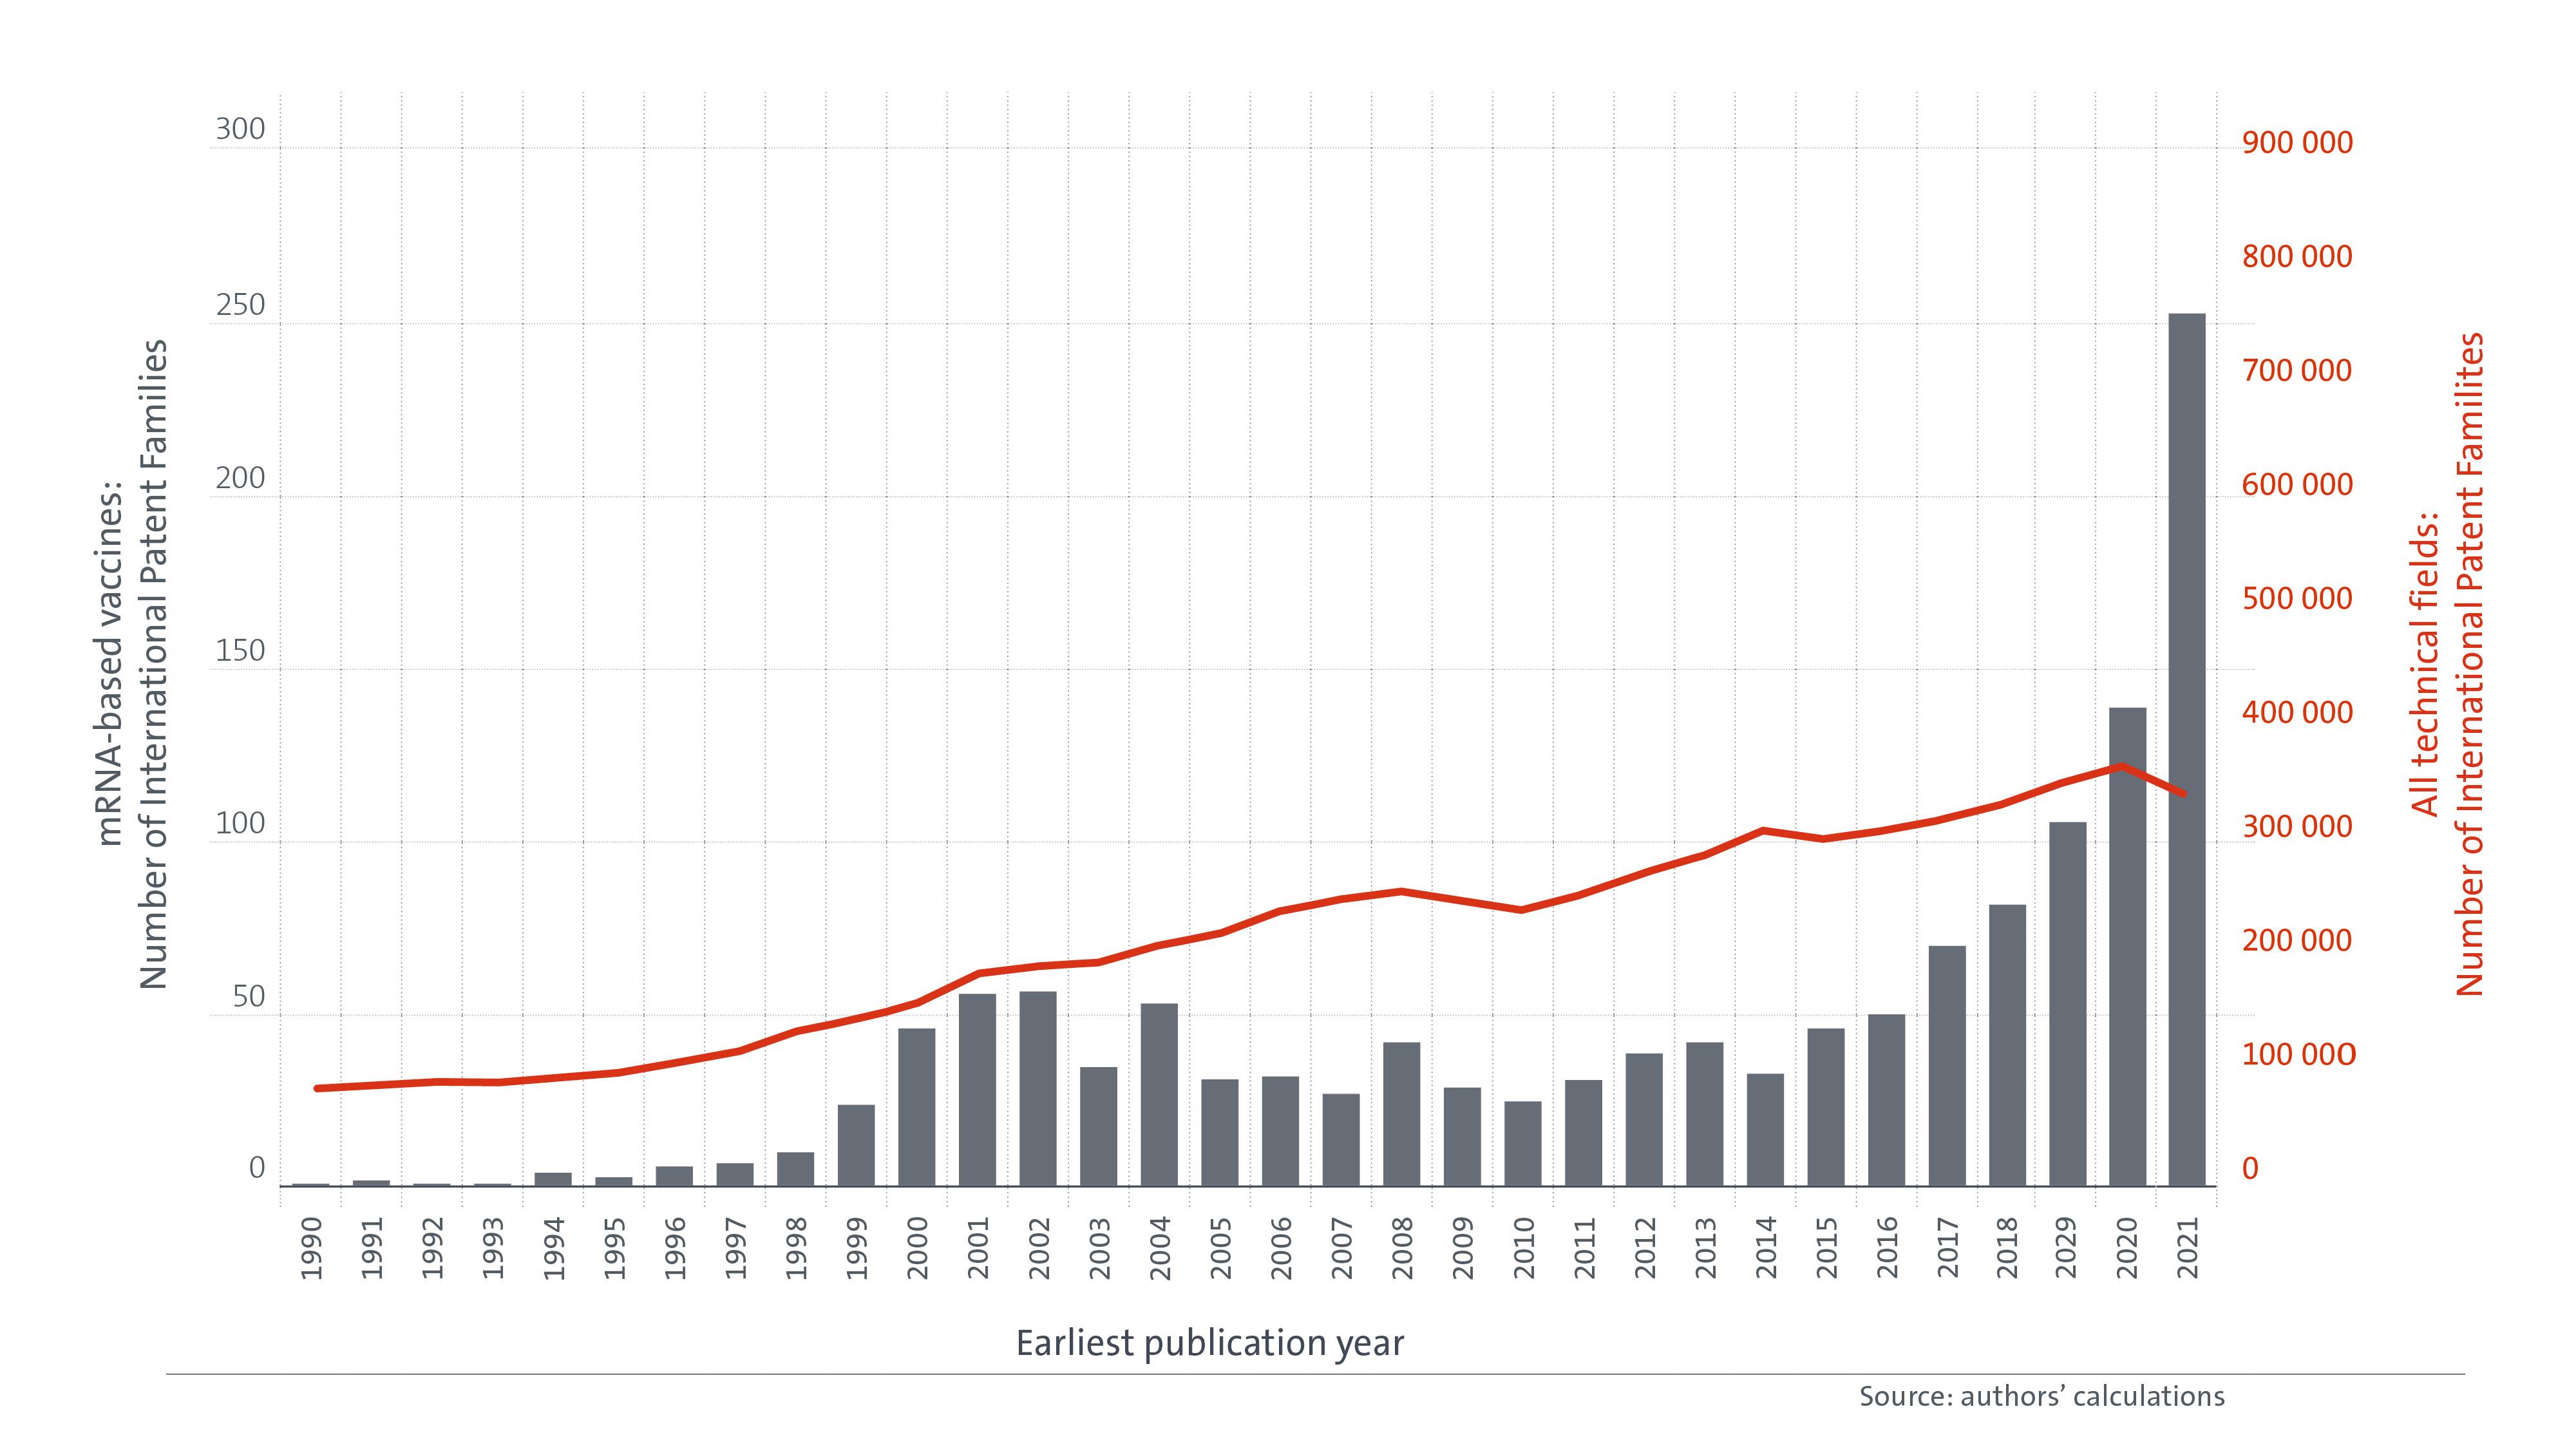 Graphic showing an upward trend in recent years in the number of international patent filings per year for mRNA-based vaccines.